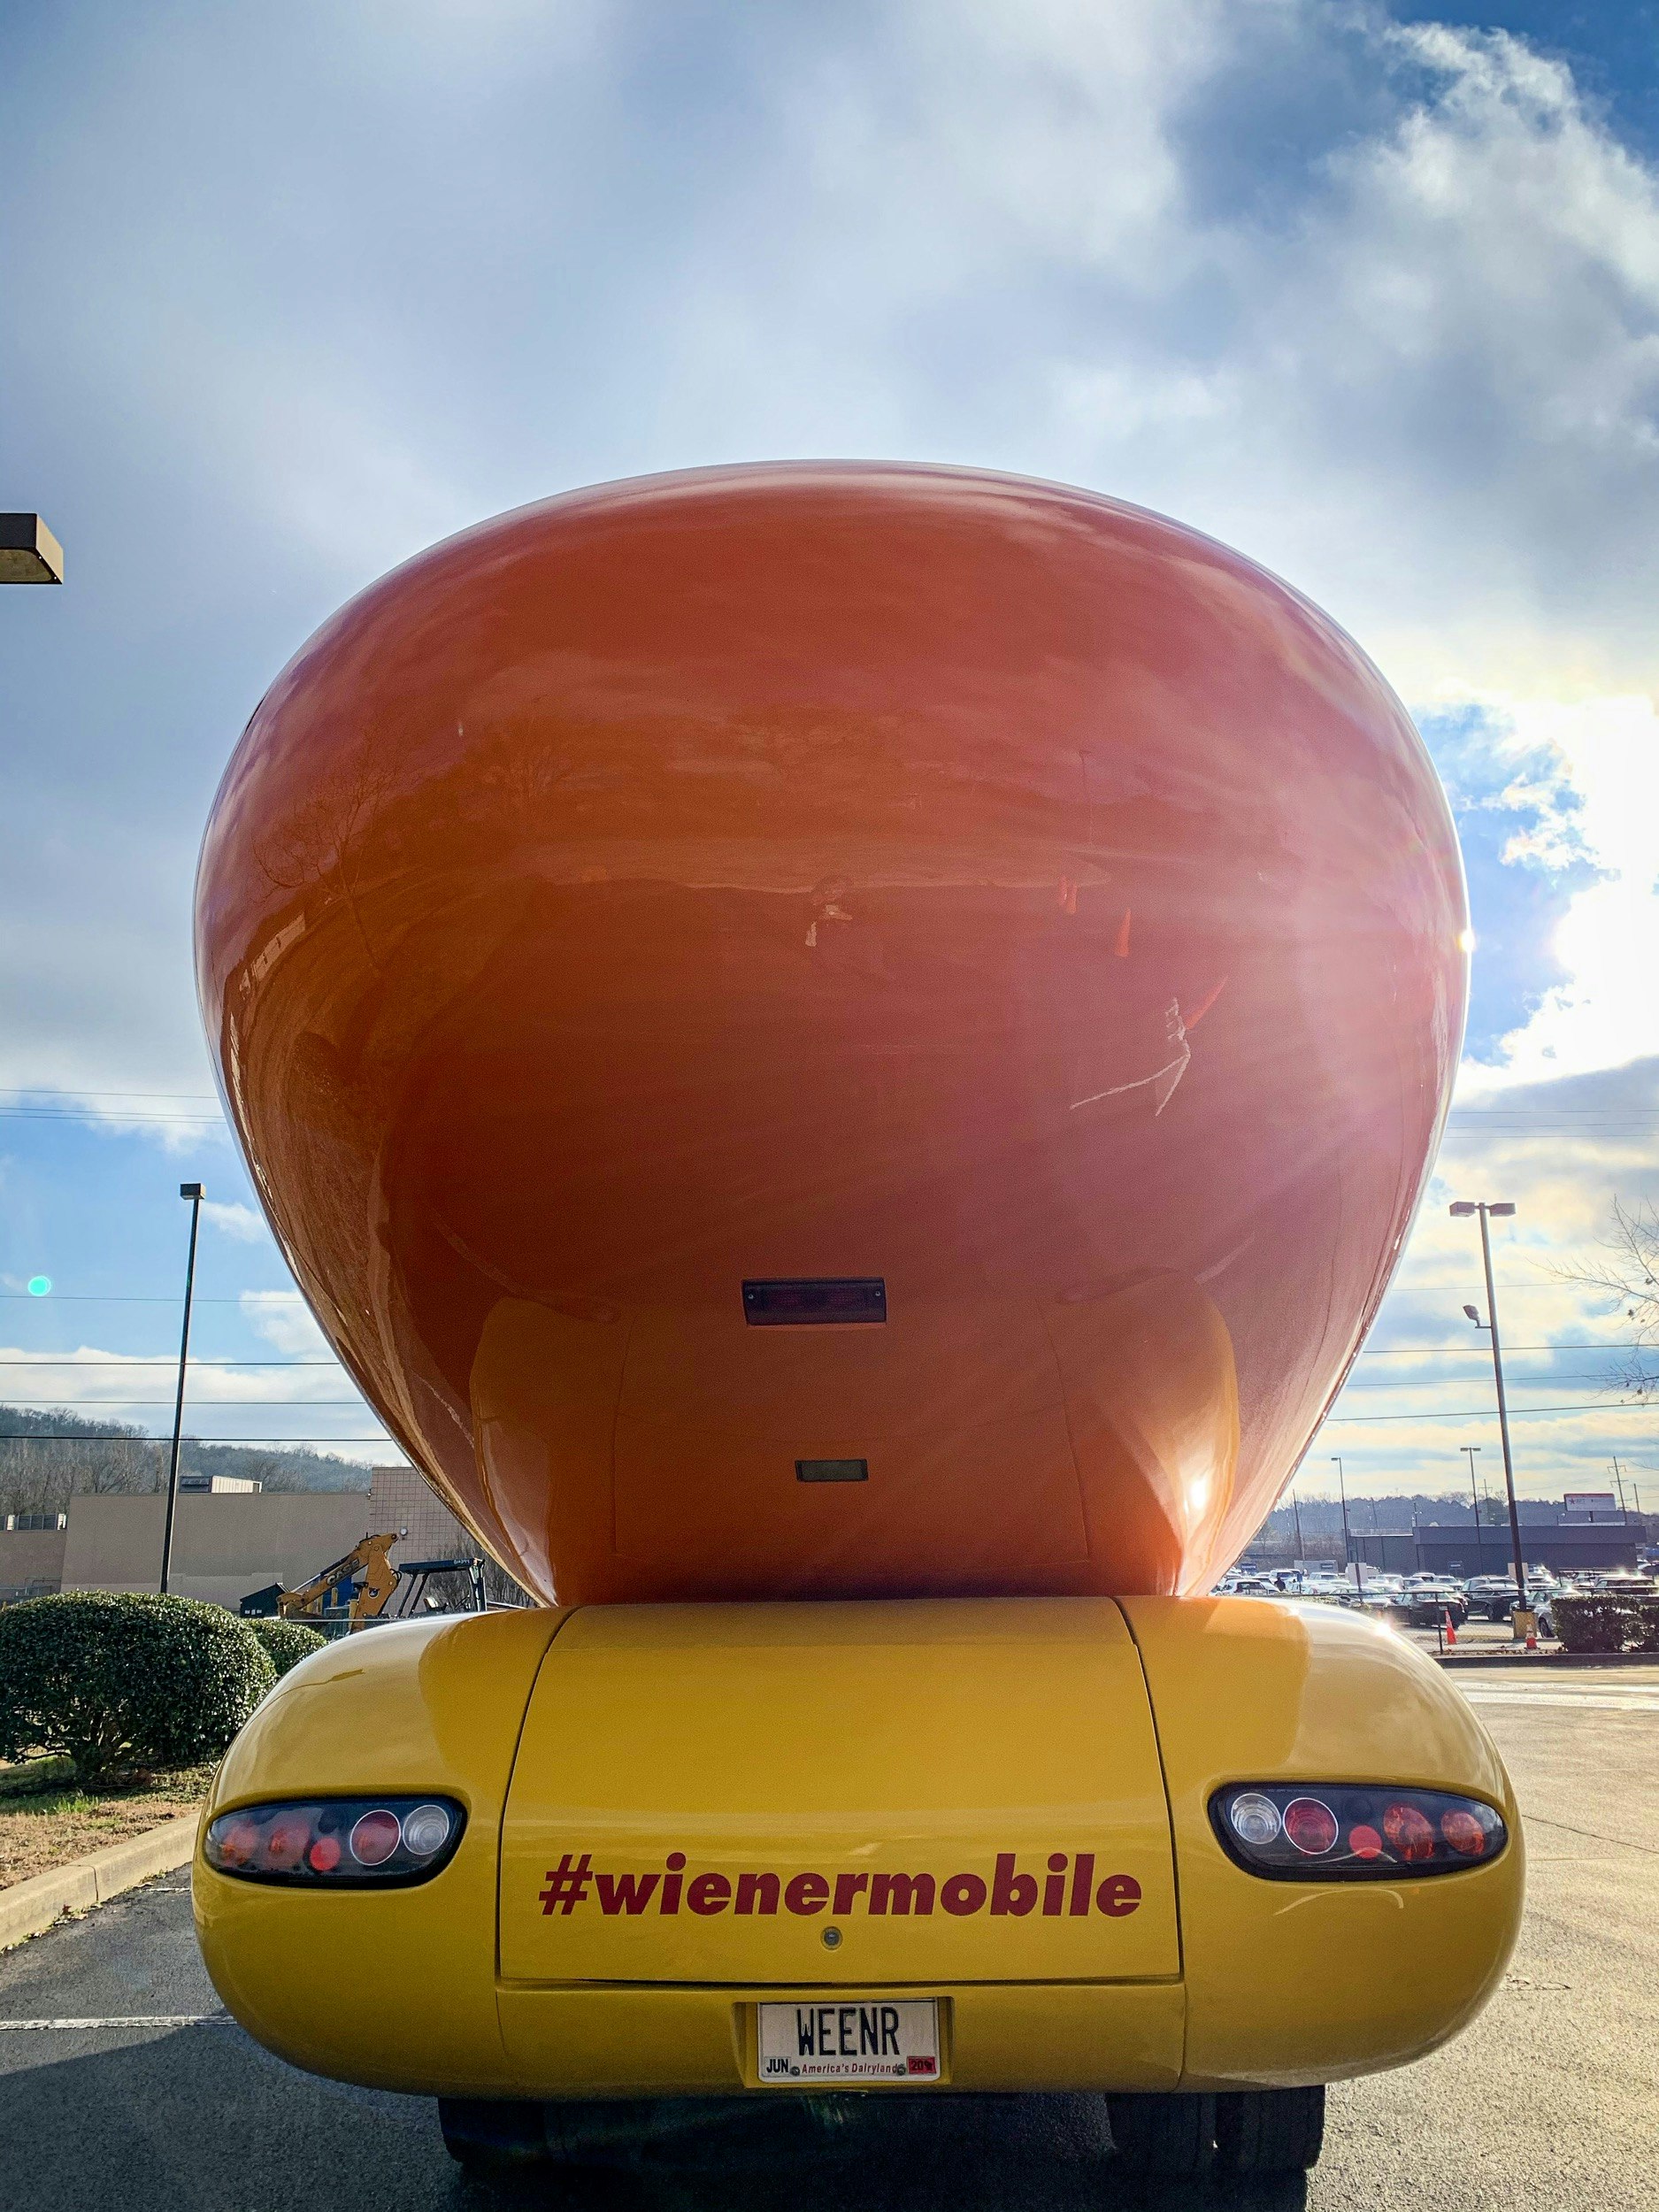 Looking at the back of the Oscar Mayer Wienermobile, the license plate reads 'WEENR"